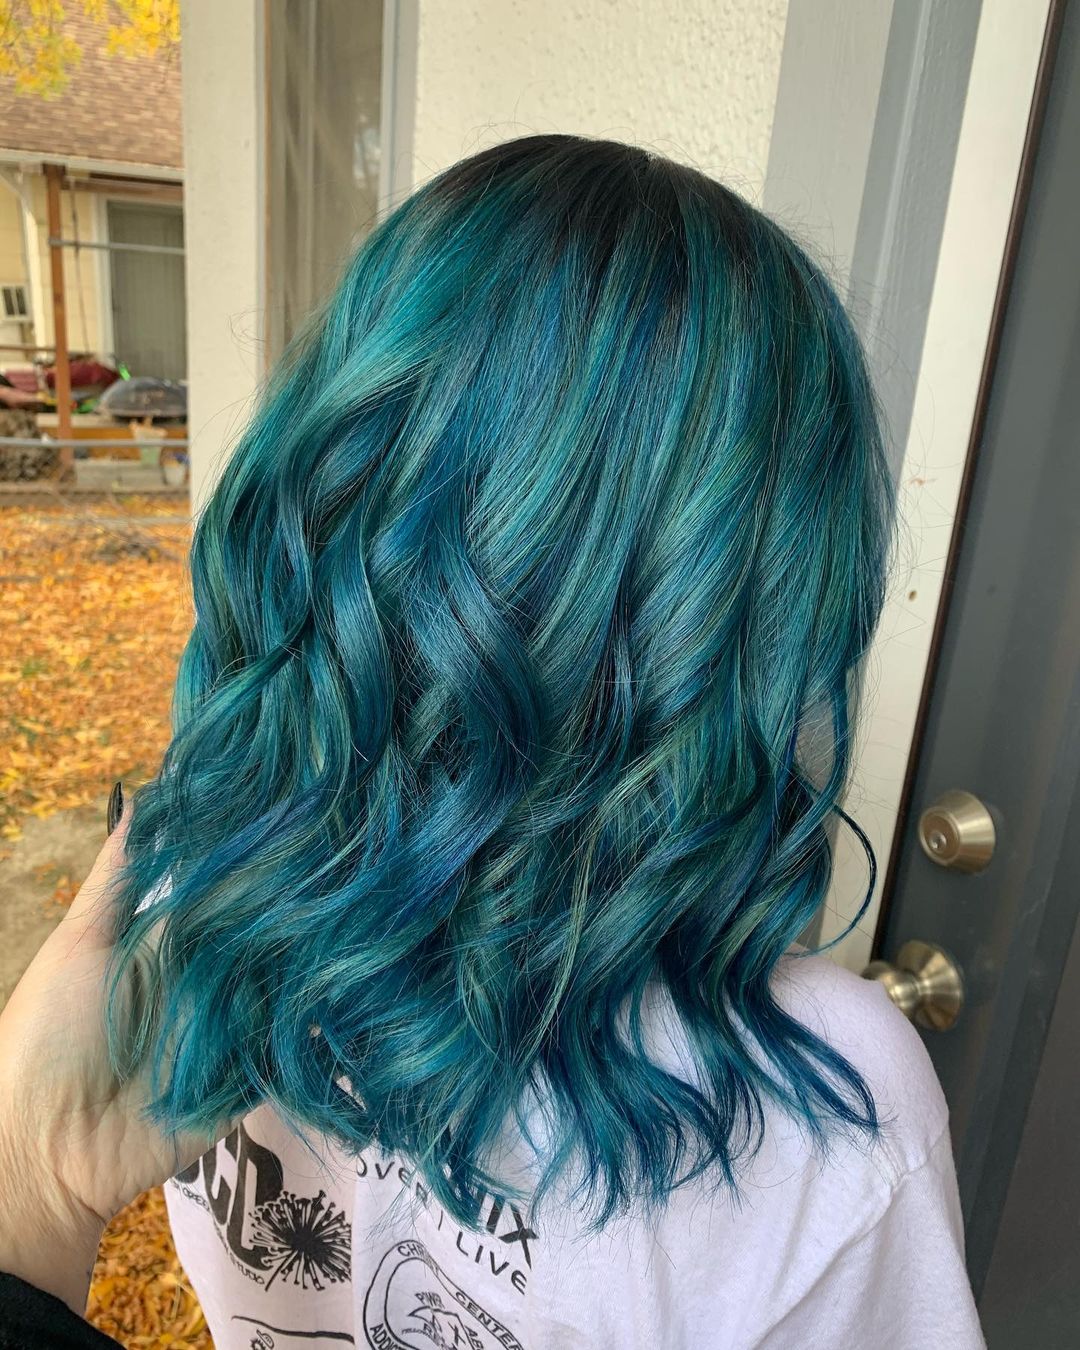 10 Teal Hair Color Ideas  How To Wear This Striking Look